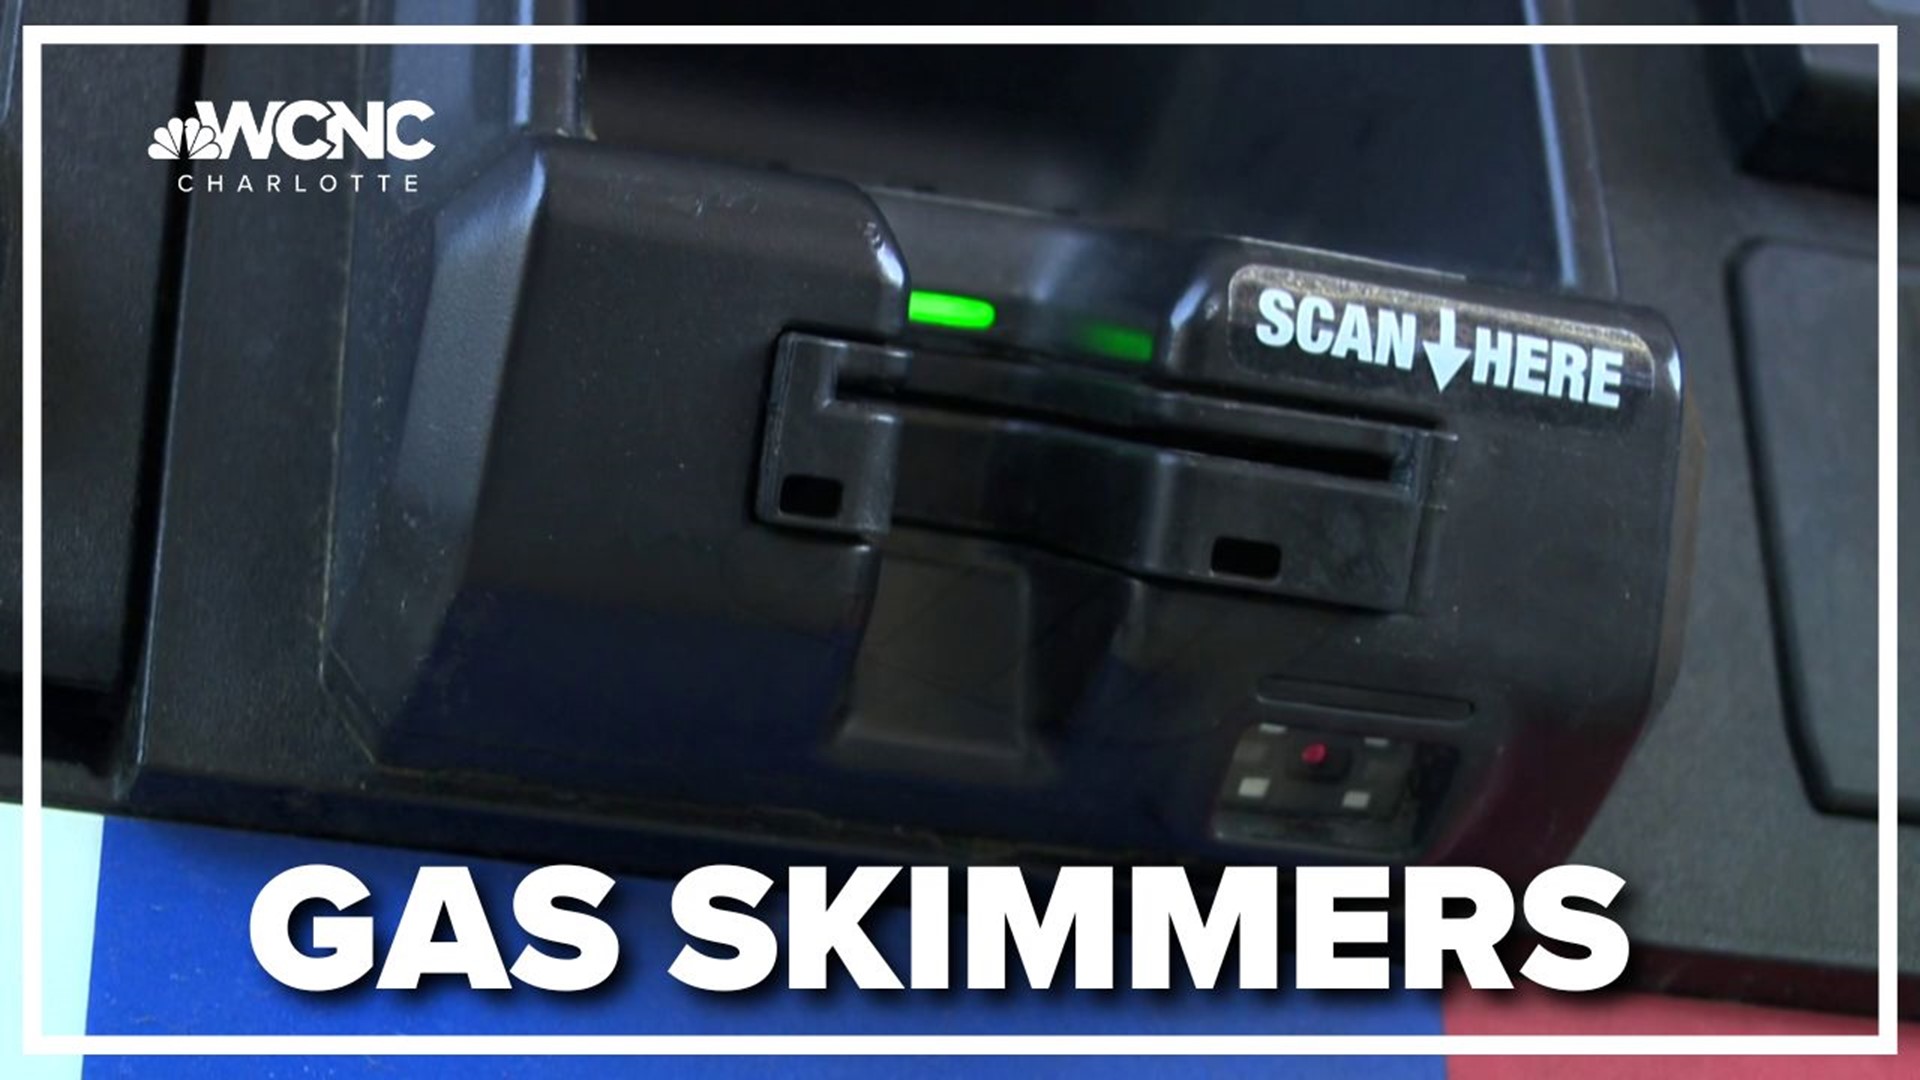 Crimes involving skimming is a more than $1 billion dollar hit to consumers and banks every year.